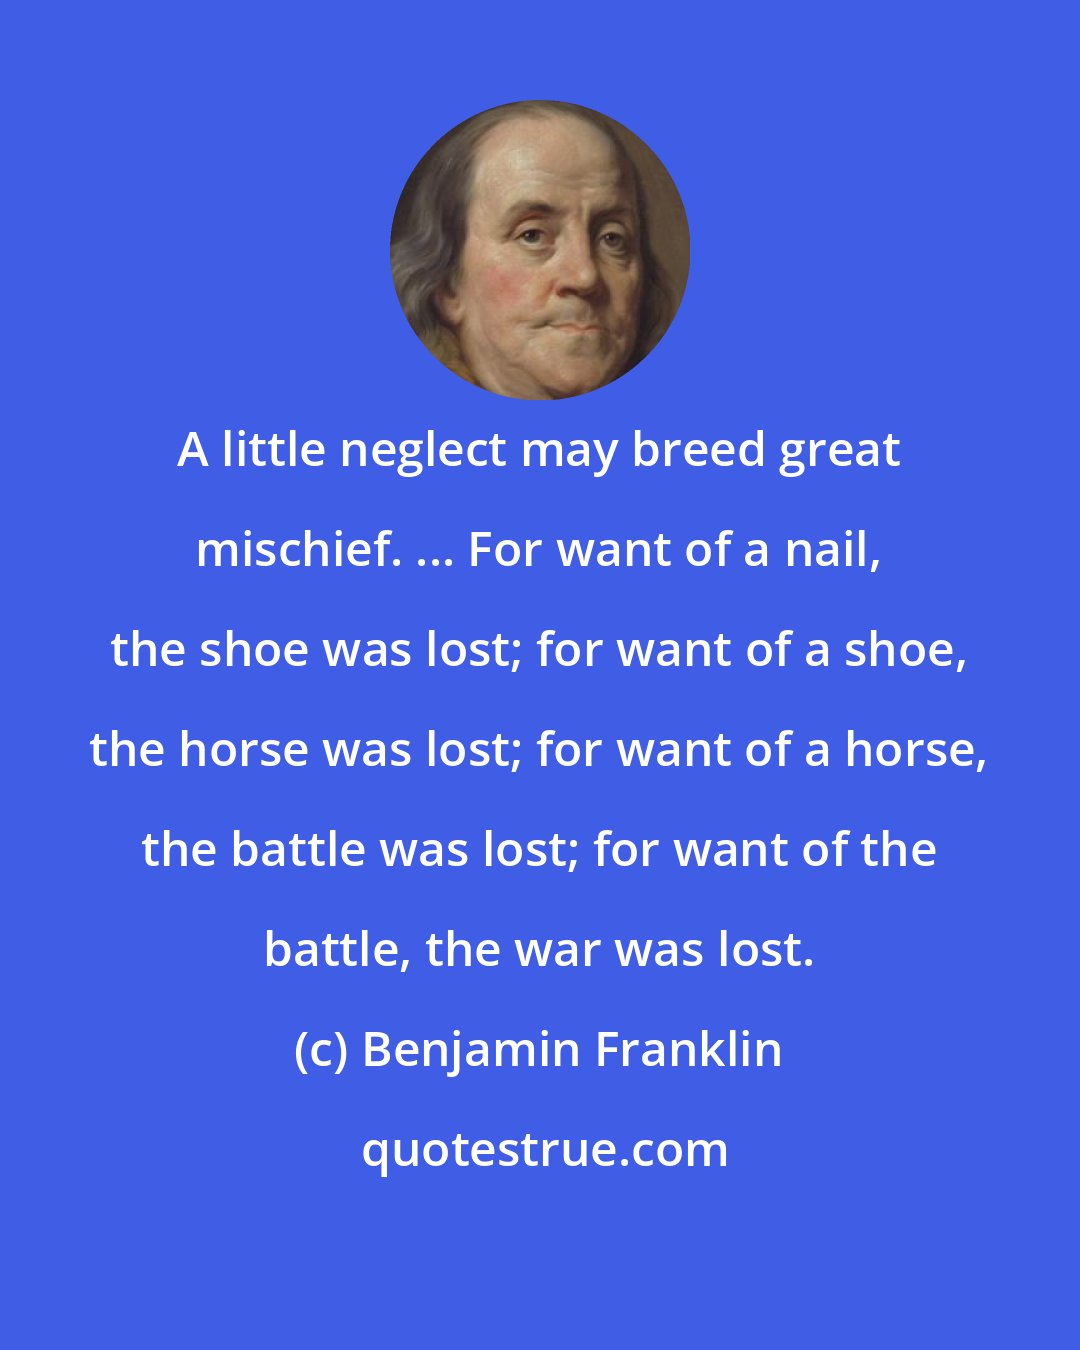 Benjamin Franklin: A little neglect may breed great mischief. ... For want of a nail, the shoe was lost; for want of a shoe, the horse was lost; for want of a horse, the battle was lost; for want of the battle, the war was lost.